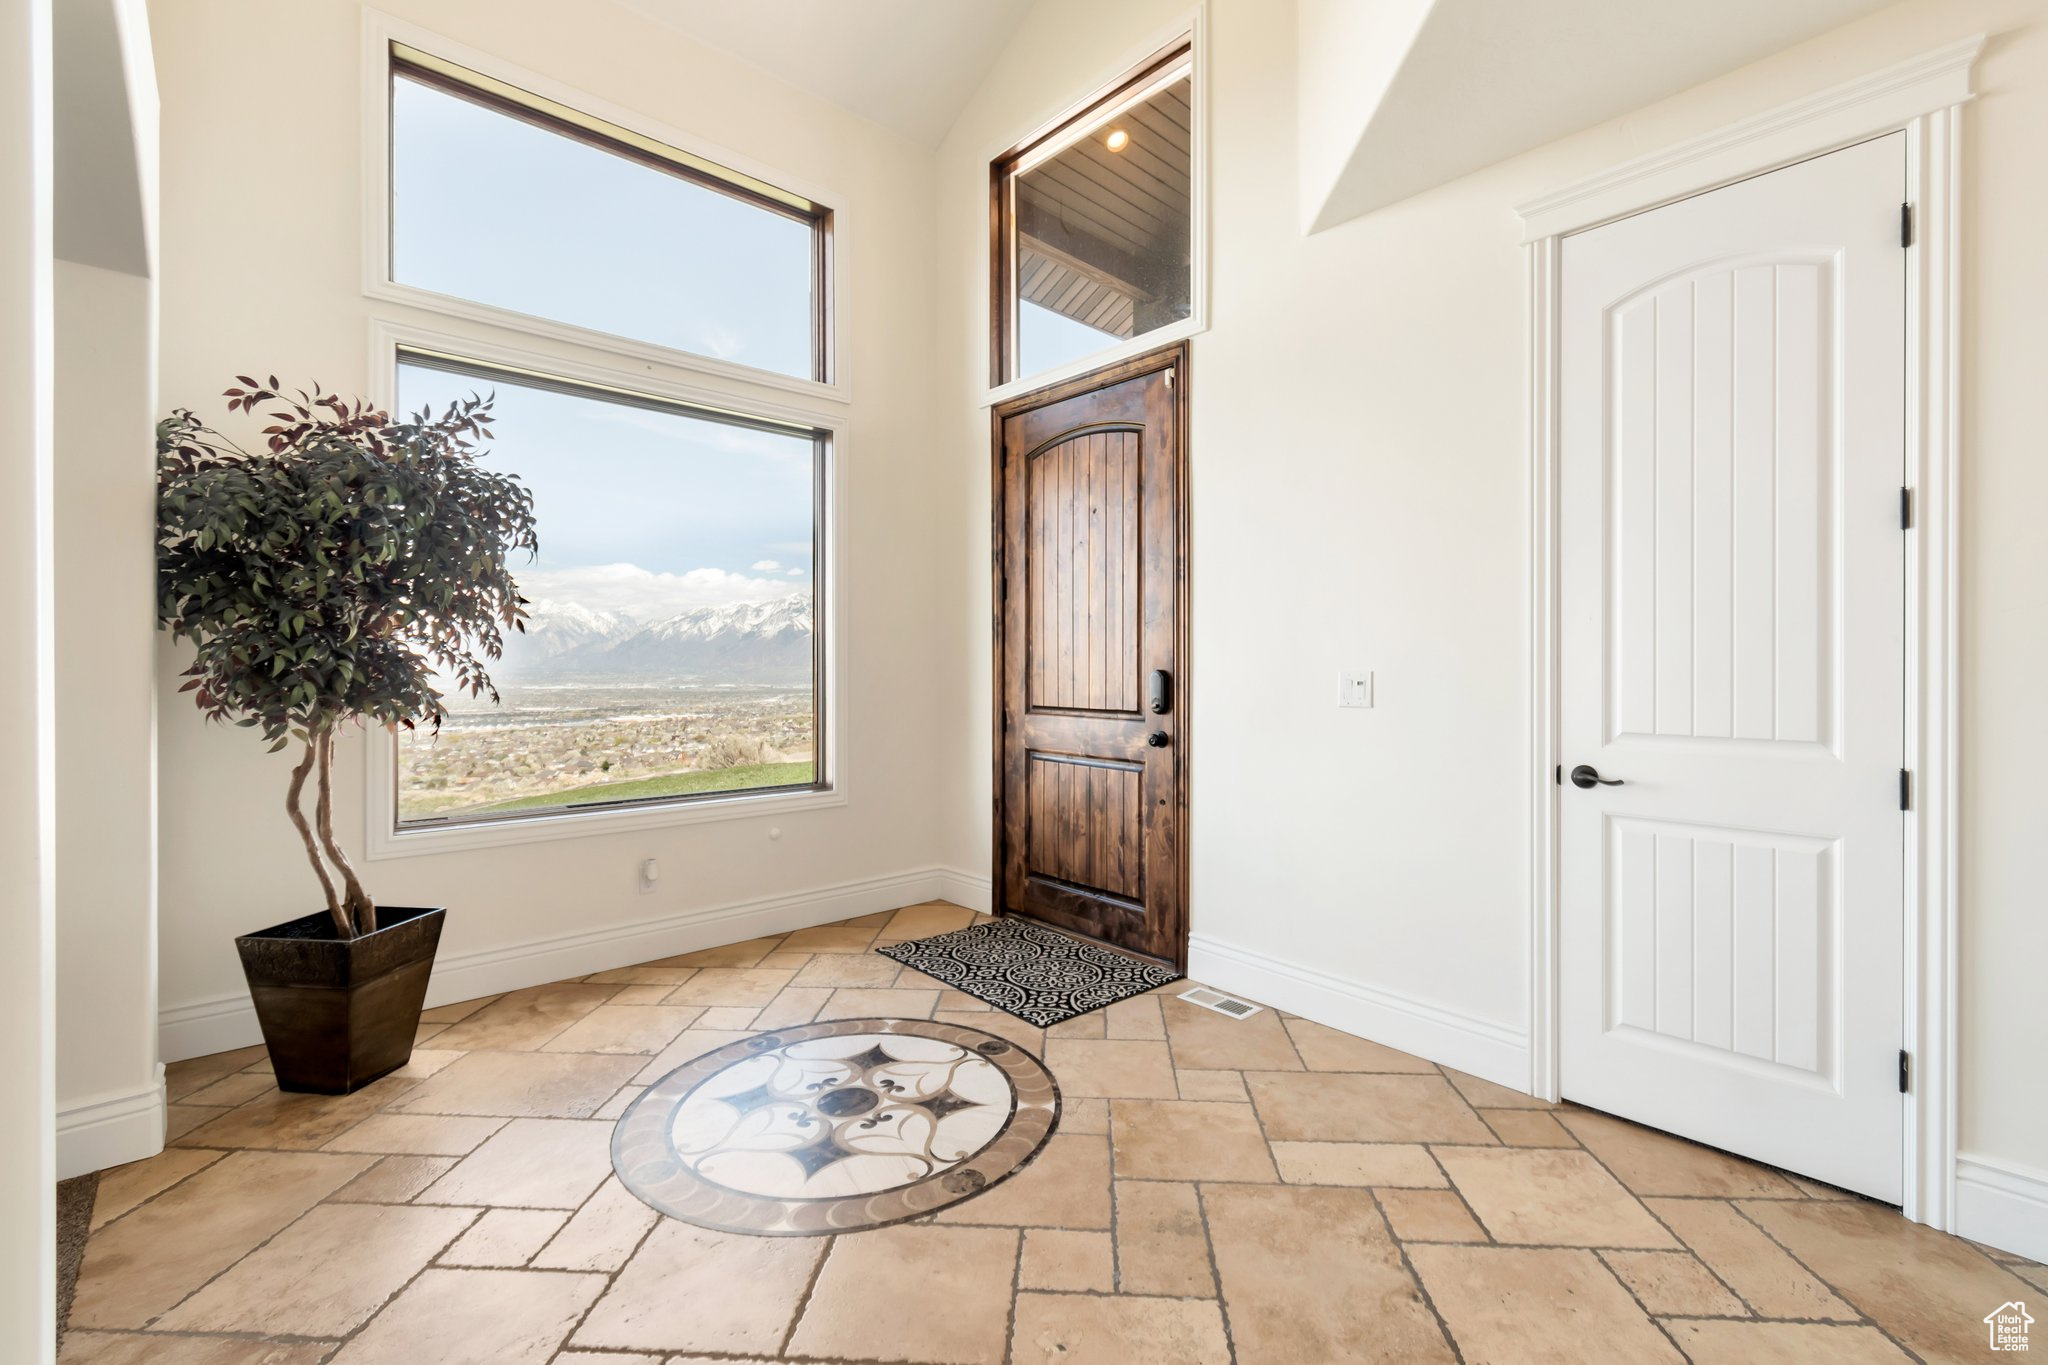 Entryway with vaulted ceiling, a mountain view, and light tile flooring